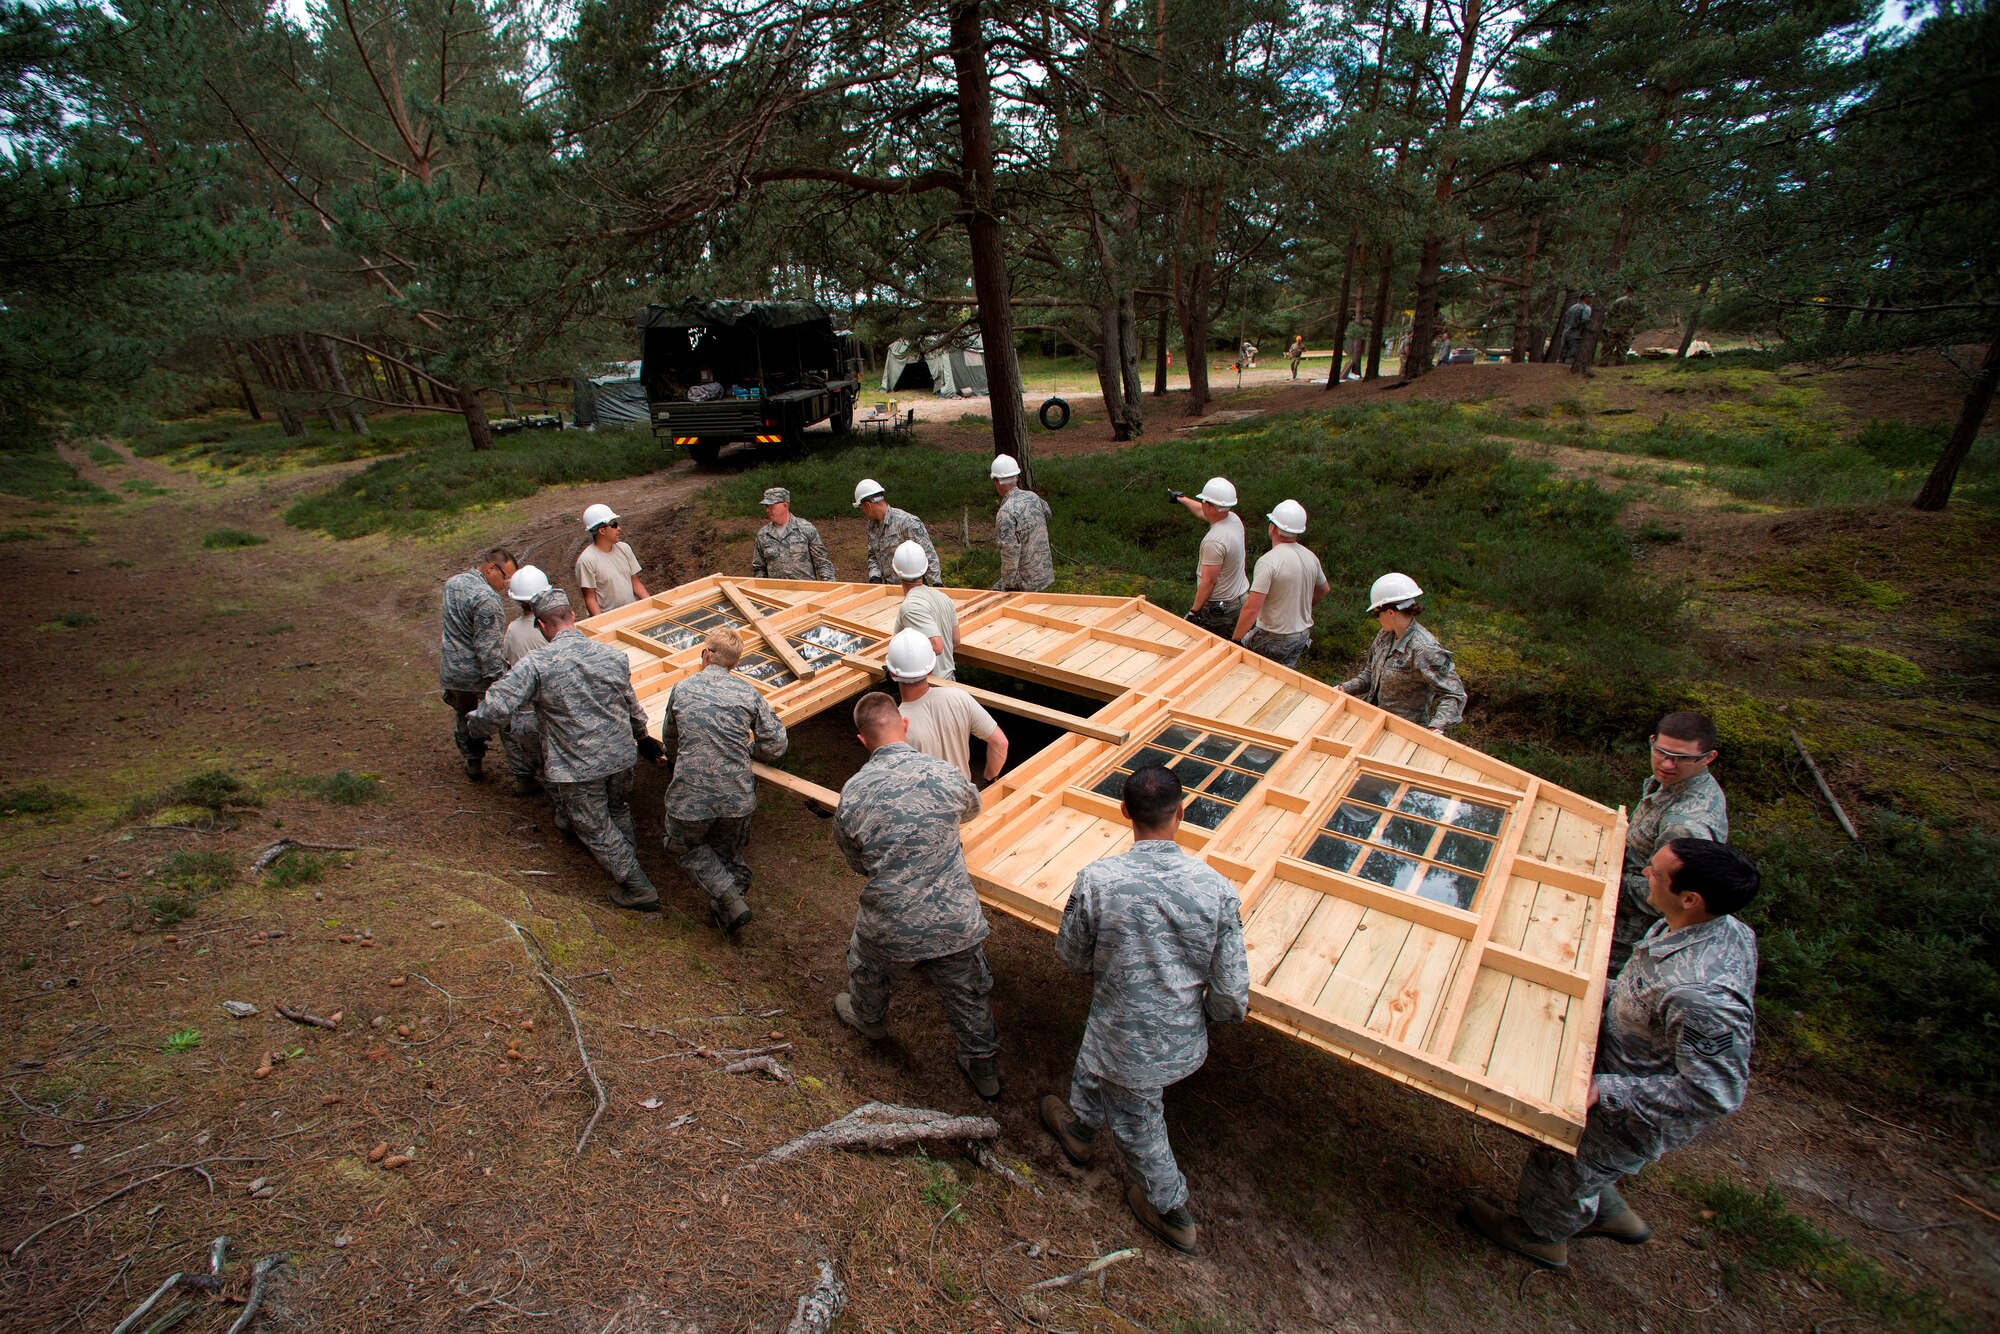 U.S. Airmen from the 140th Civil Engineer Squadron, Colorado Air National Guard, carry the front wall away from the small single room structure that is being taken apart and reassembled later in a more suitable location, during their deployed for training trip, known as Exercise Flying Rose at Kinloss Barrack in Forres, Moray, Scotland, United Kingdom, Jun. 11, 2014. Over 40 members of the 140th CES are in Scotland for their annual training and are accomplishing five construction projects that will improve several areas around Kinloss Barracks, during Exercise Flying Rose hosted by the British Army before returning back to Colorado later this month. (U.S. Air National Guard photo/Tech. Sgt. Wolfram M. Stumpf)